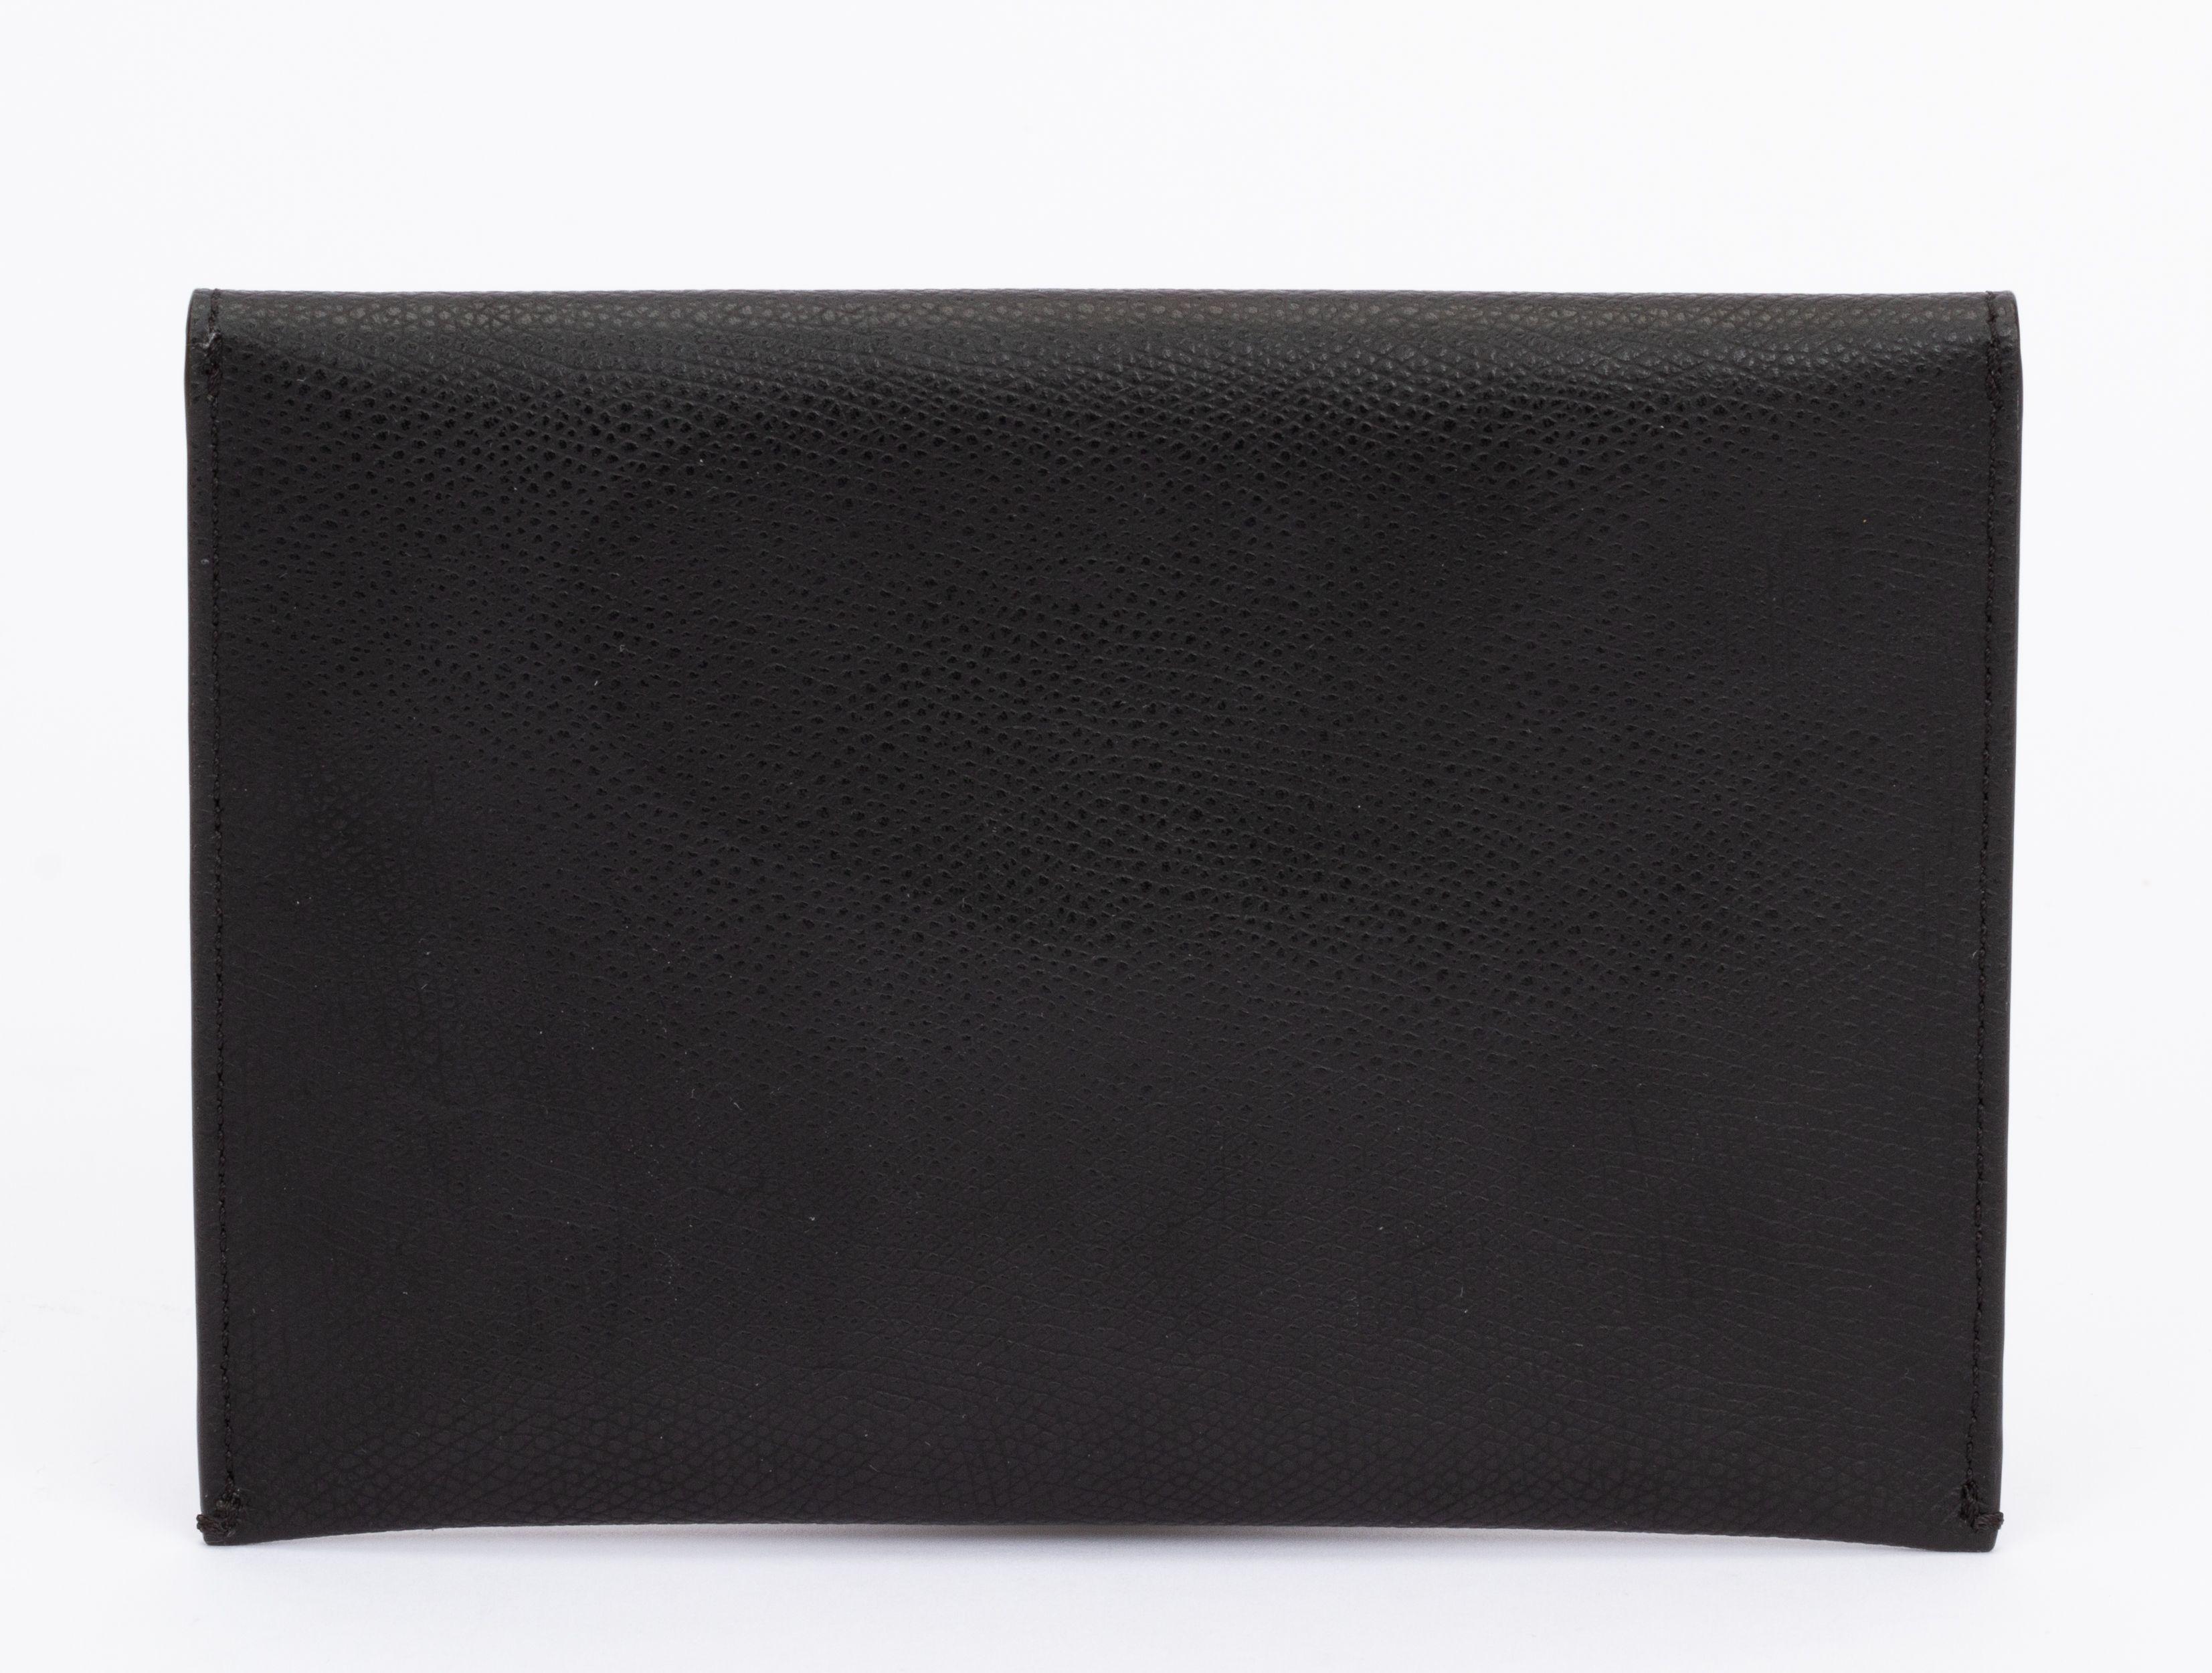 Fendi Envelope Pouch Black Medium In New Condition For Sale In West Hollywood, CA